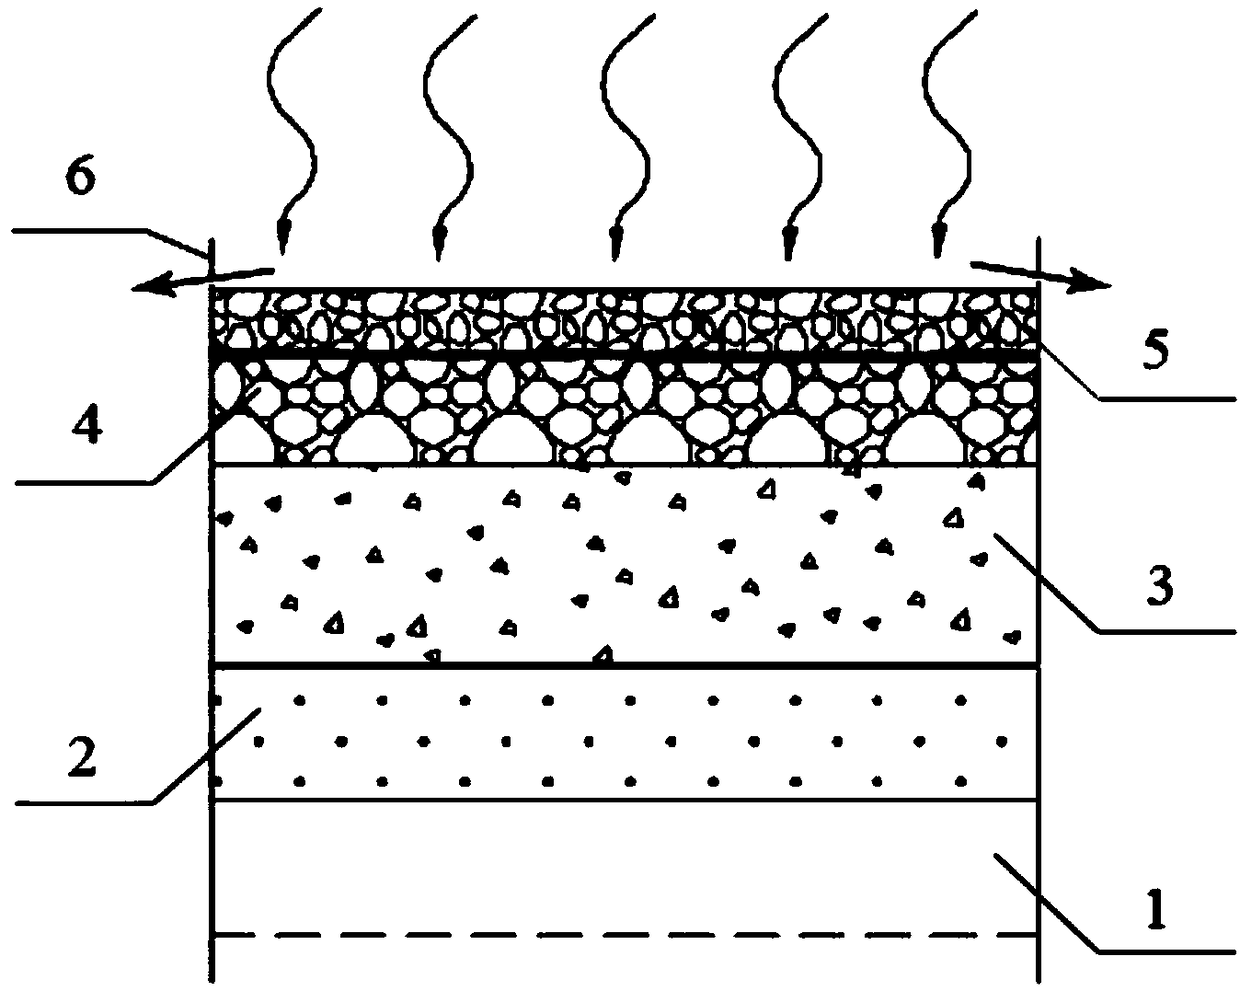 A construction method of sponge city ecological infiltration ground